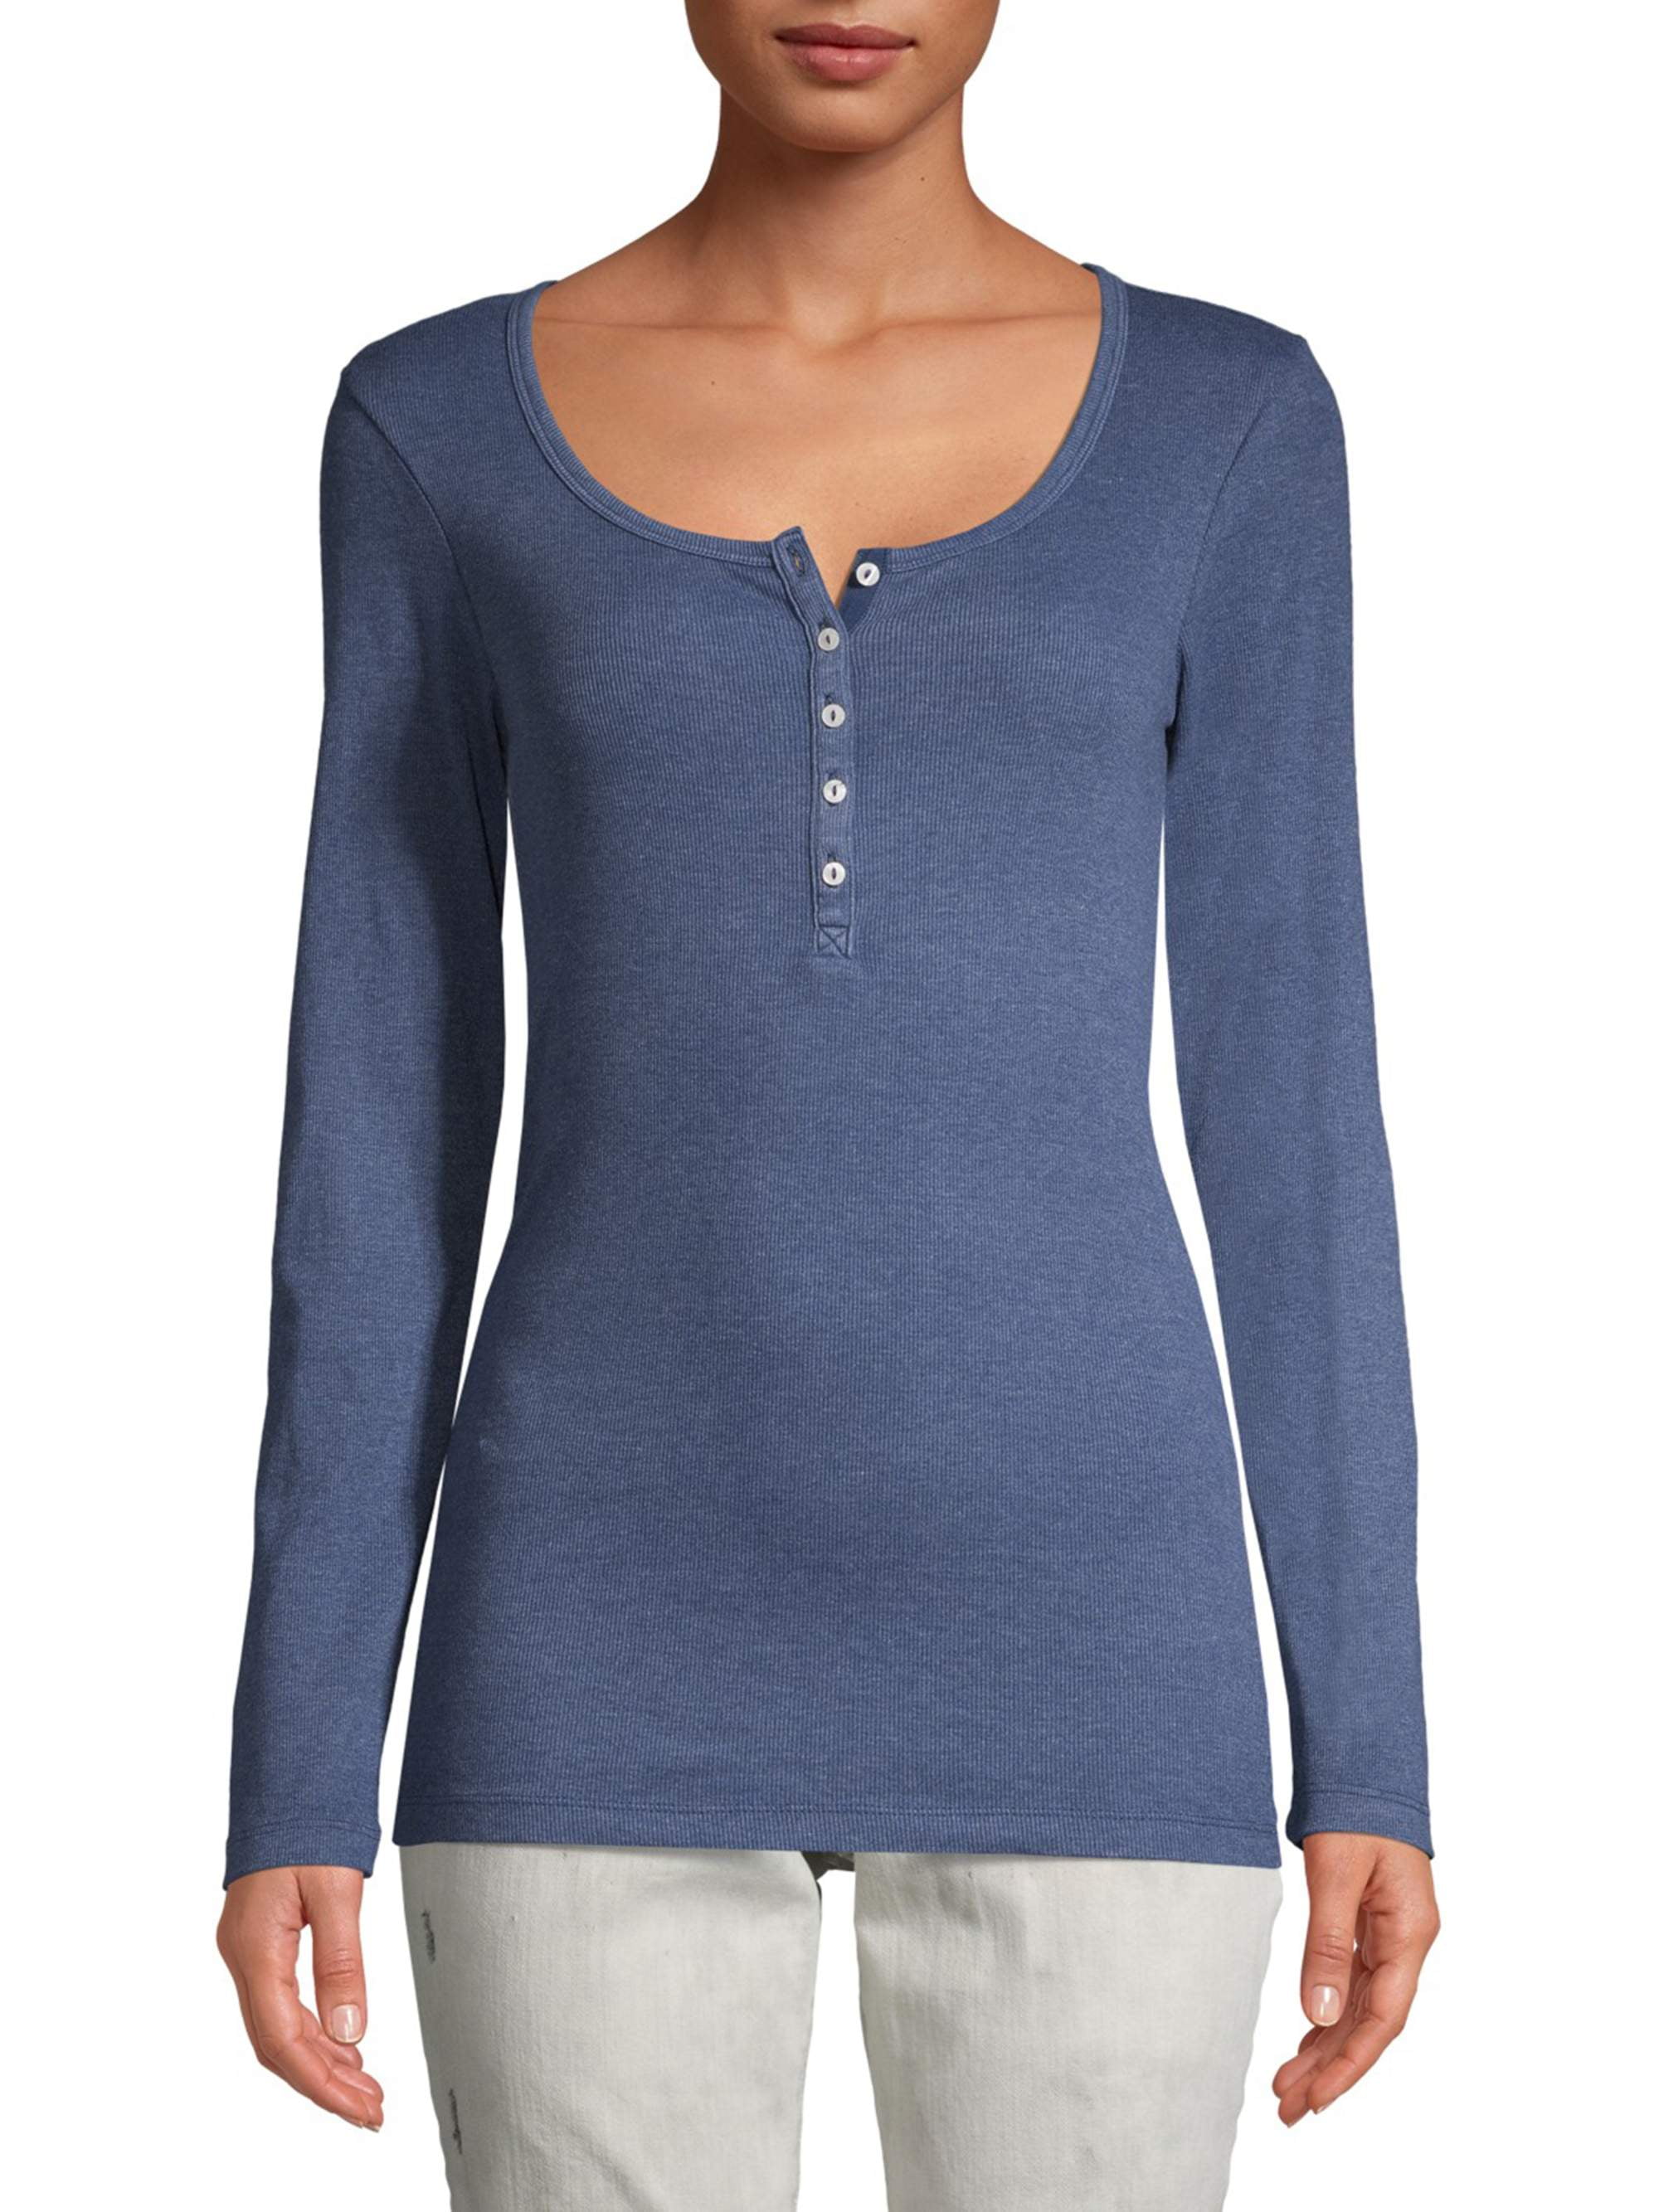 Womens Long Sleeve Henley Tops Round Neck Slim Fit Shirts Button Ribbed Knit Casual Tees